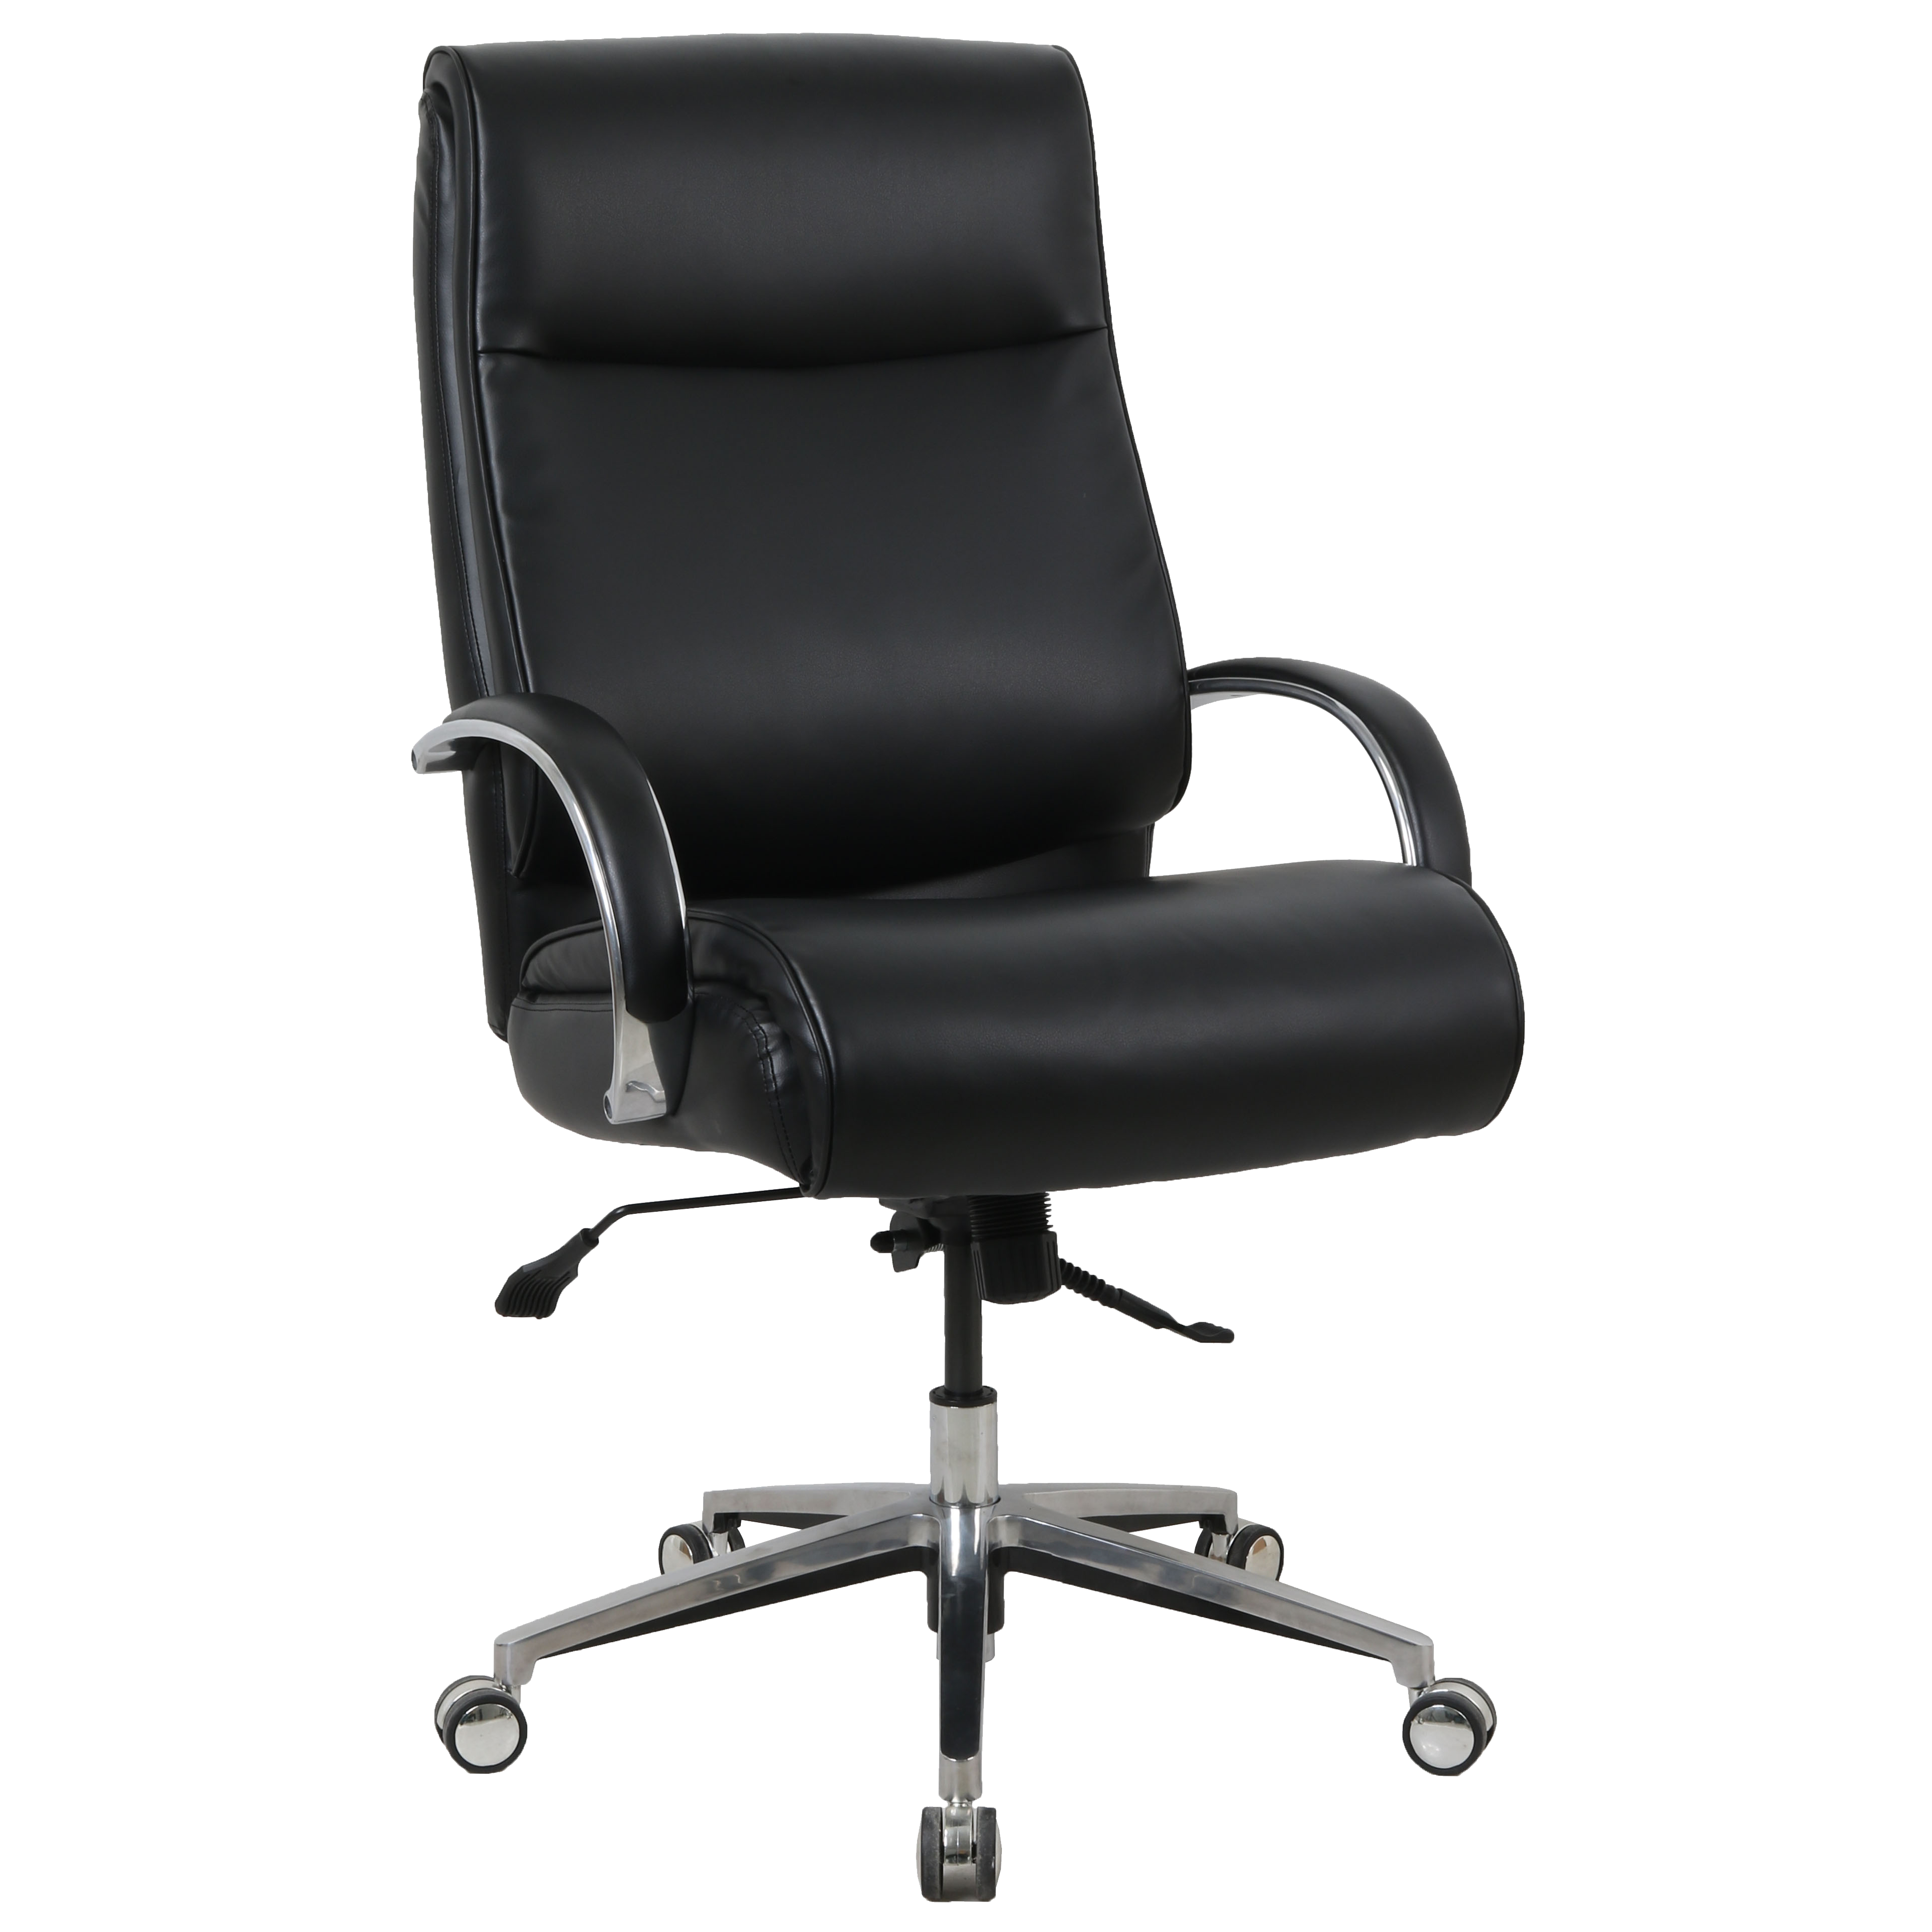 OFD-553 CHUZE High Back Executive Chair with Memory Foam - ACE Is 